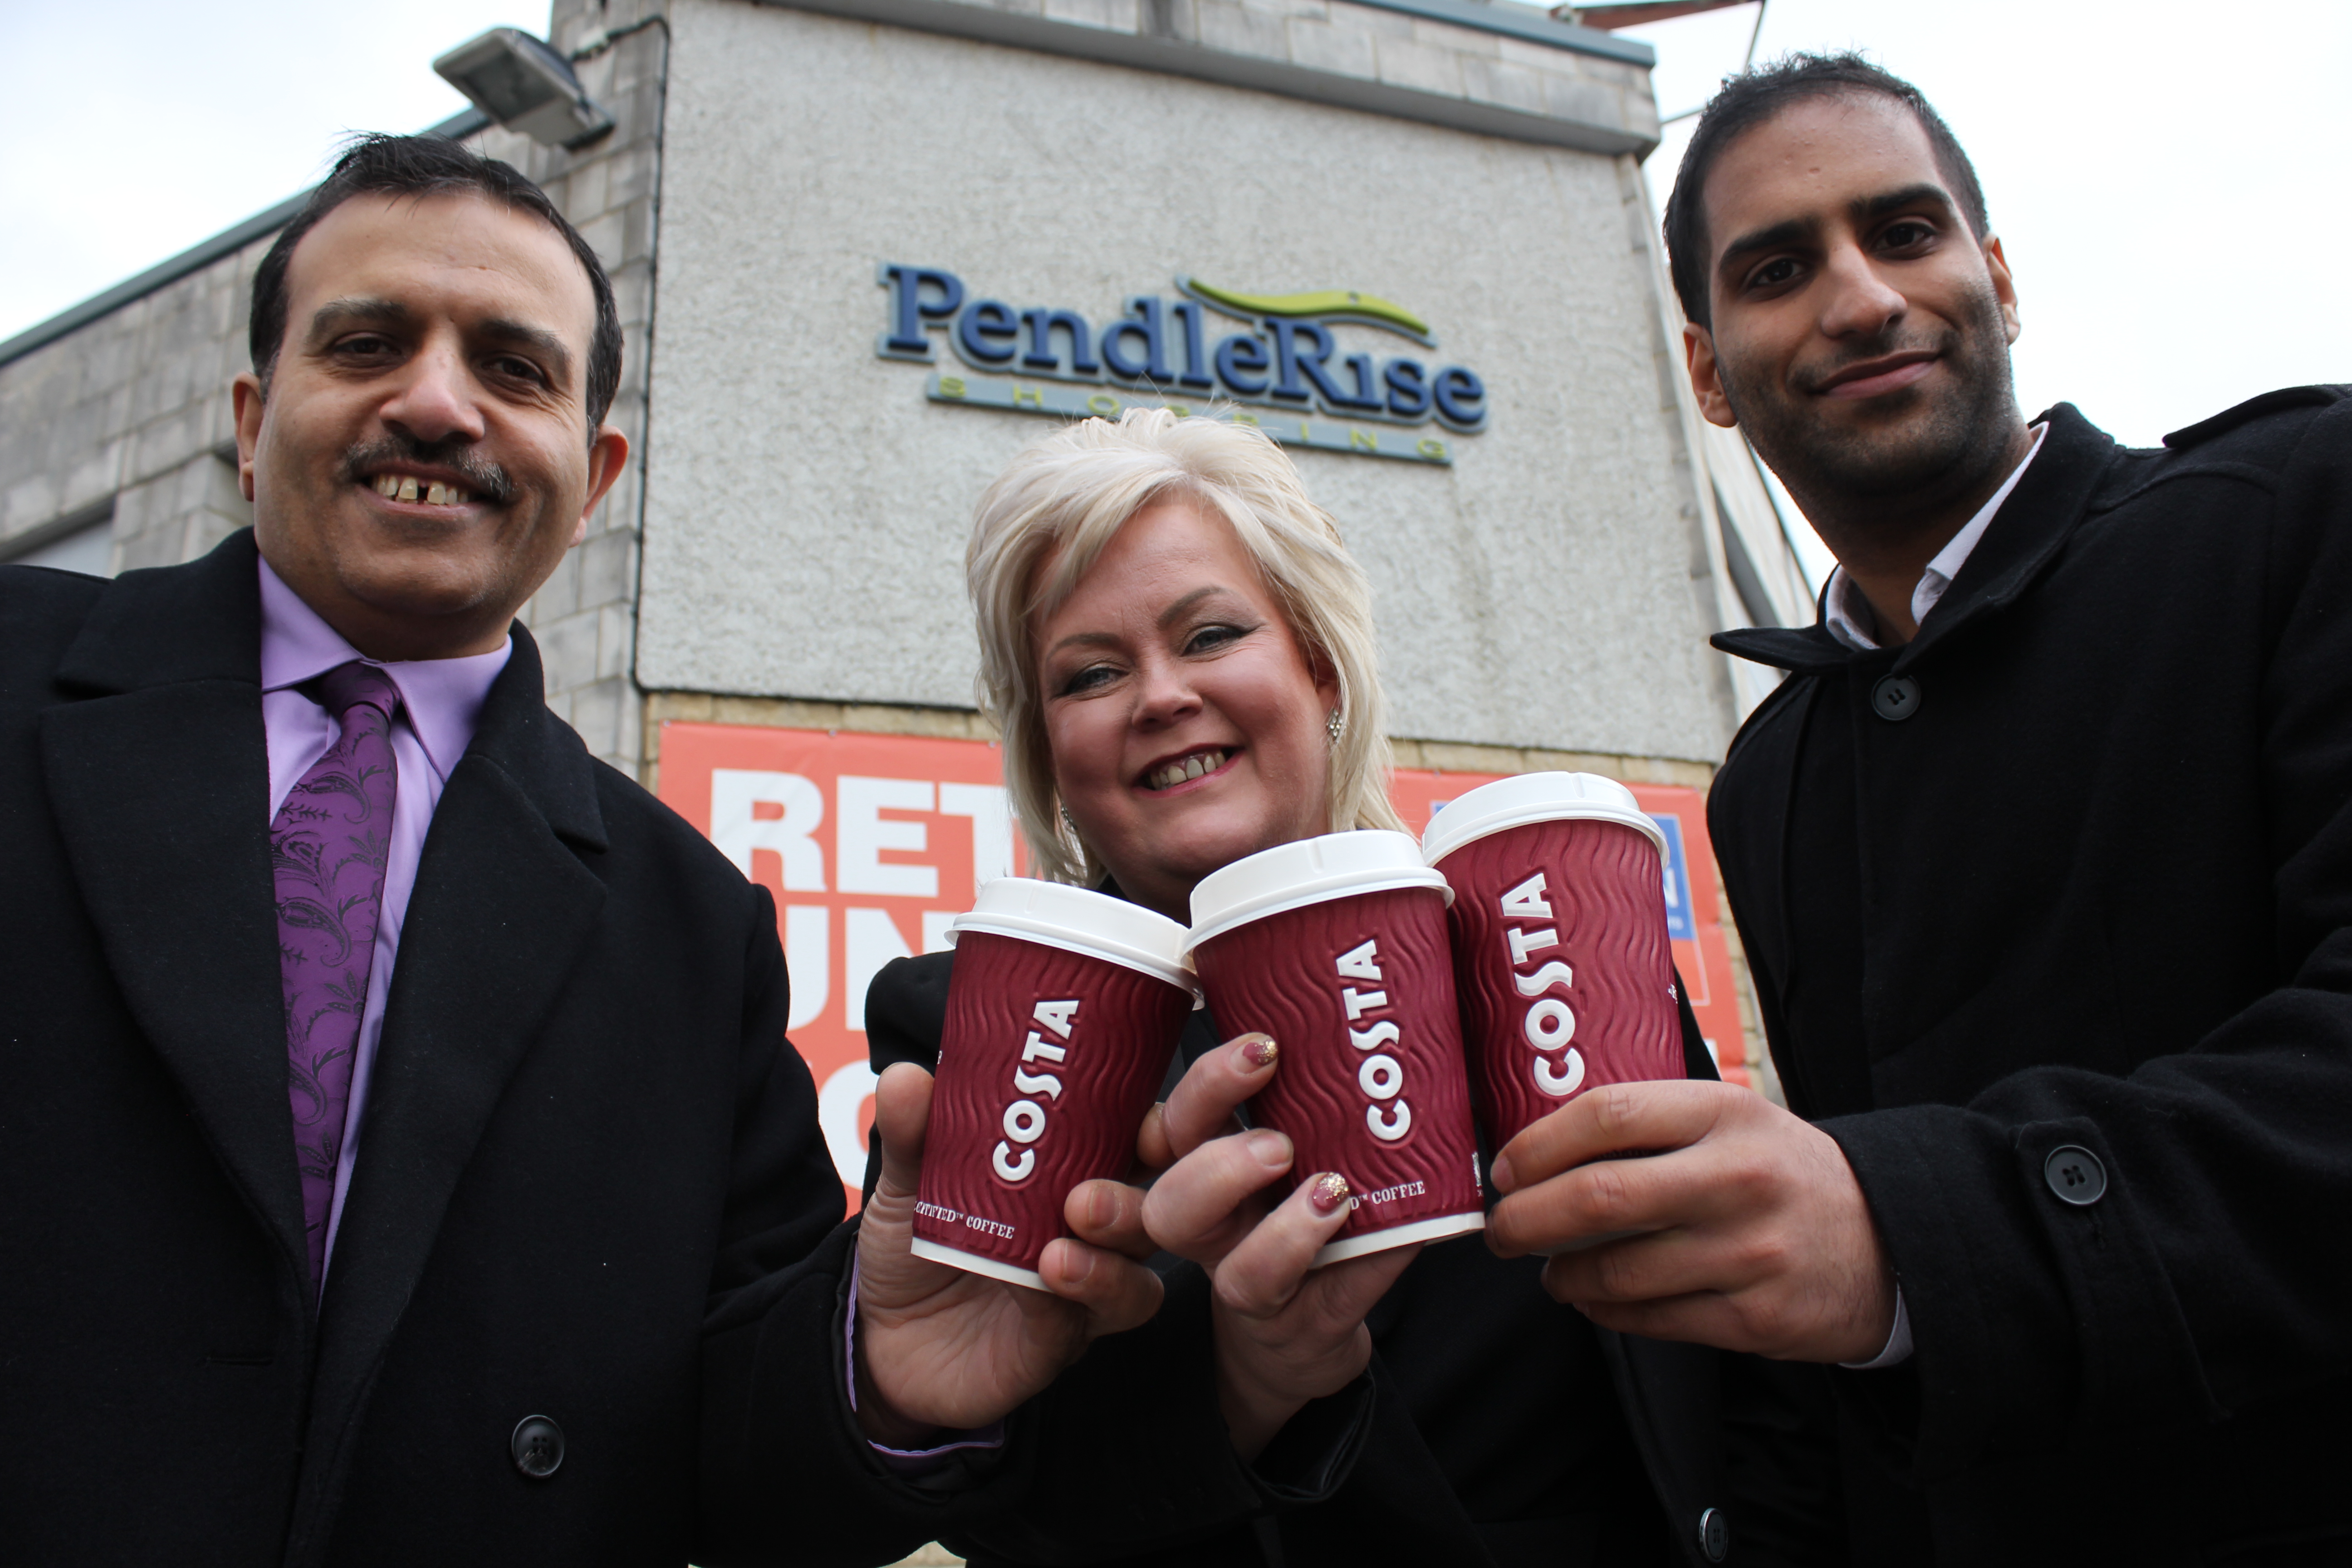 A photo feature Cllr Iqbal, Debbie Hernon of Pendle Rise and Hassan Ditta of Pendle Council